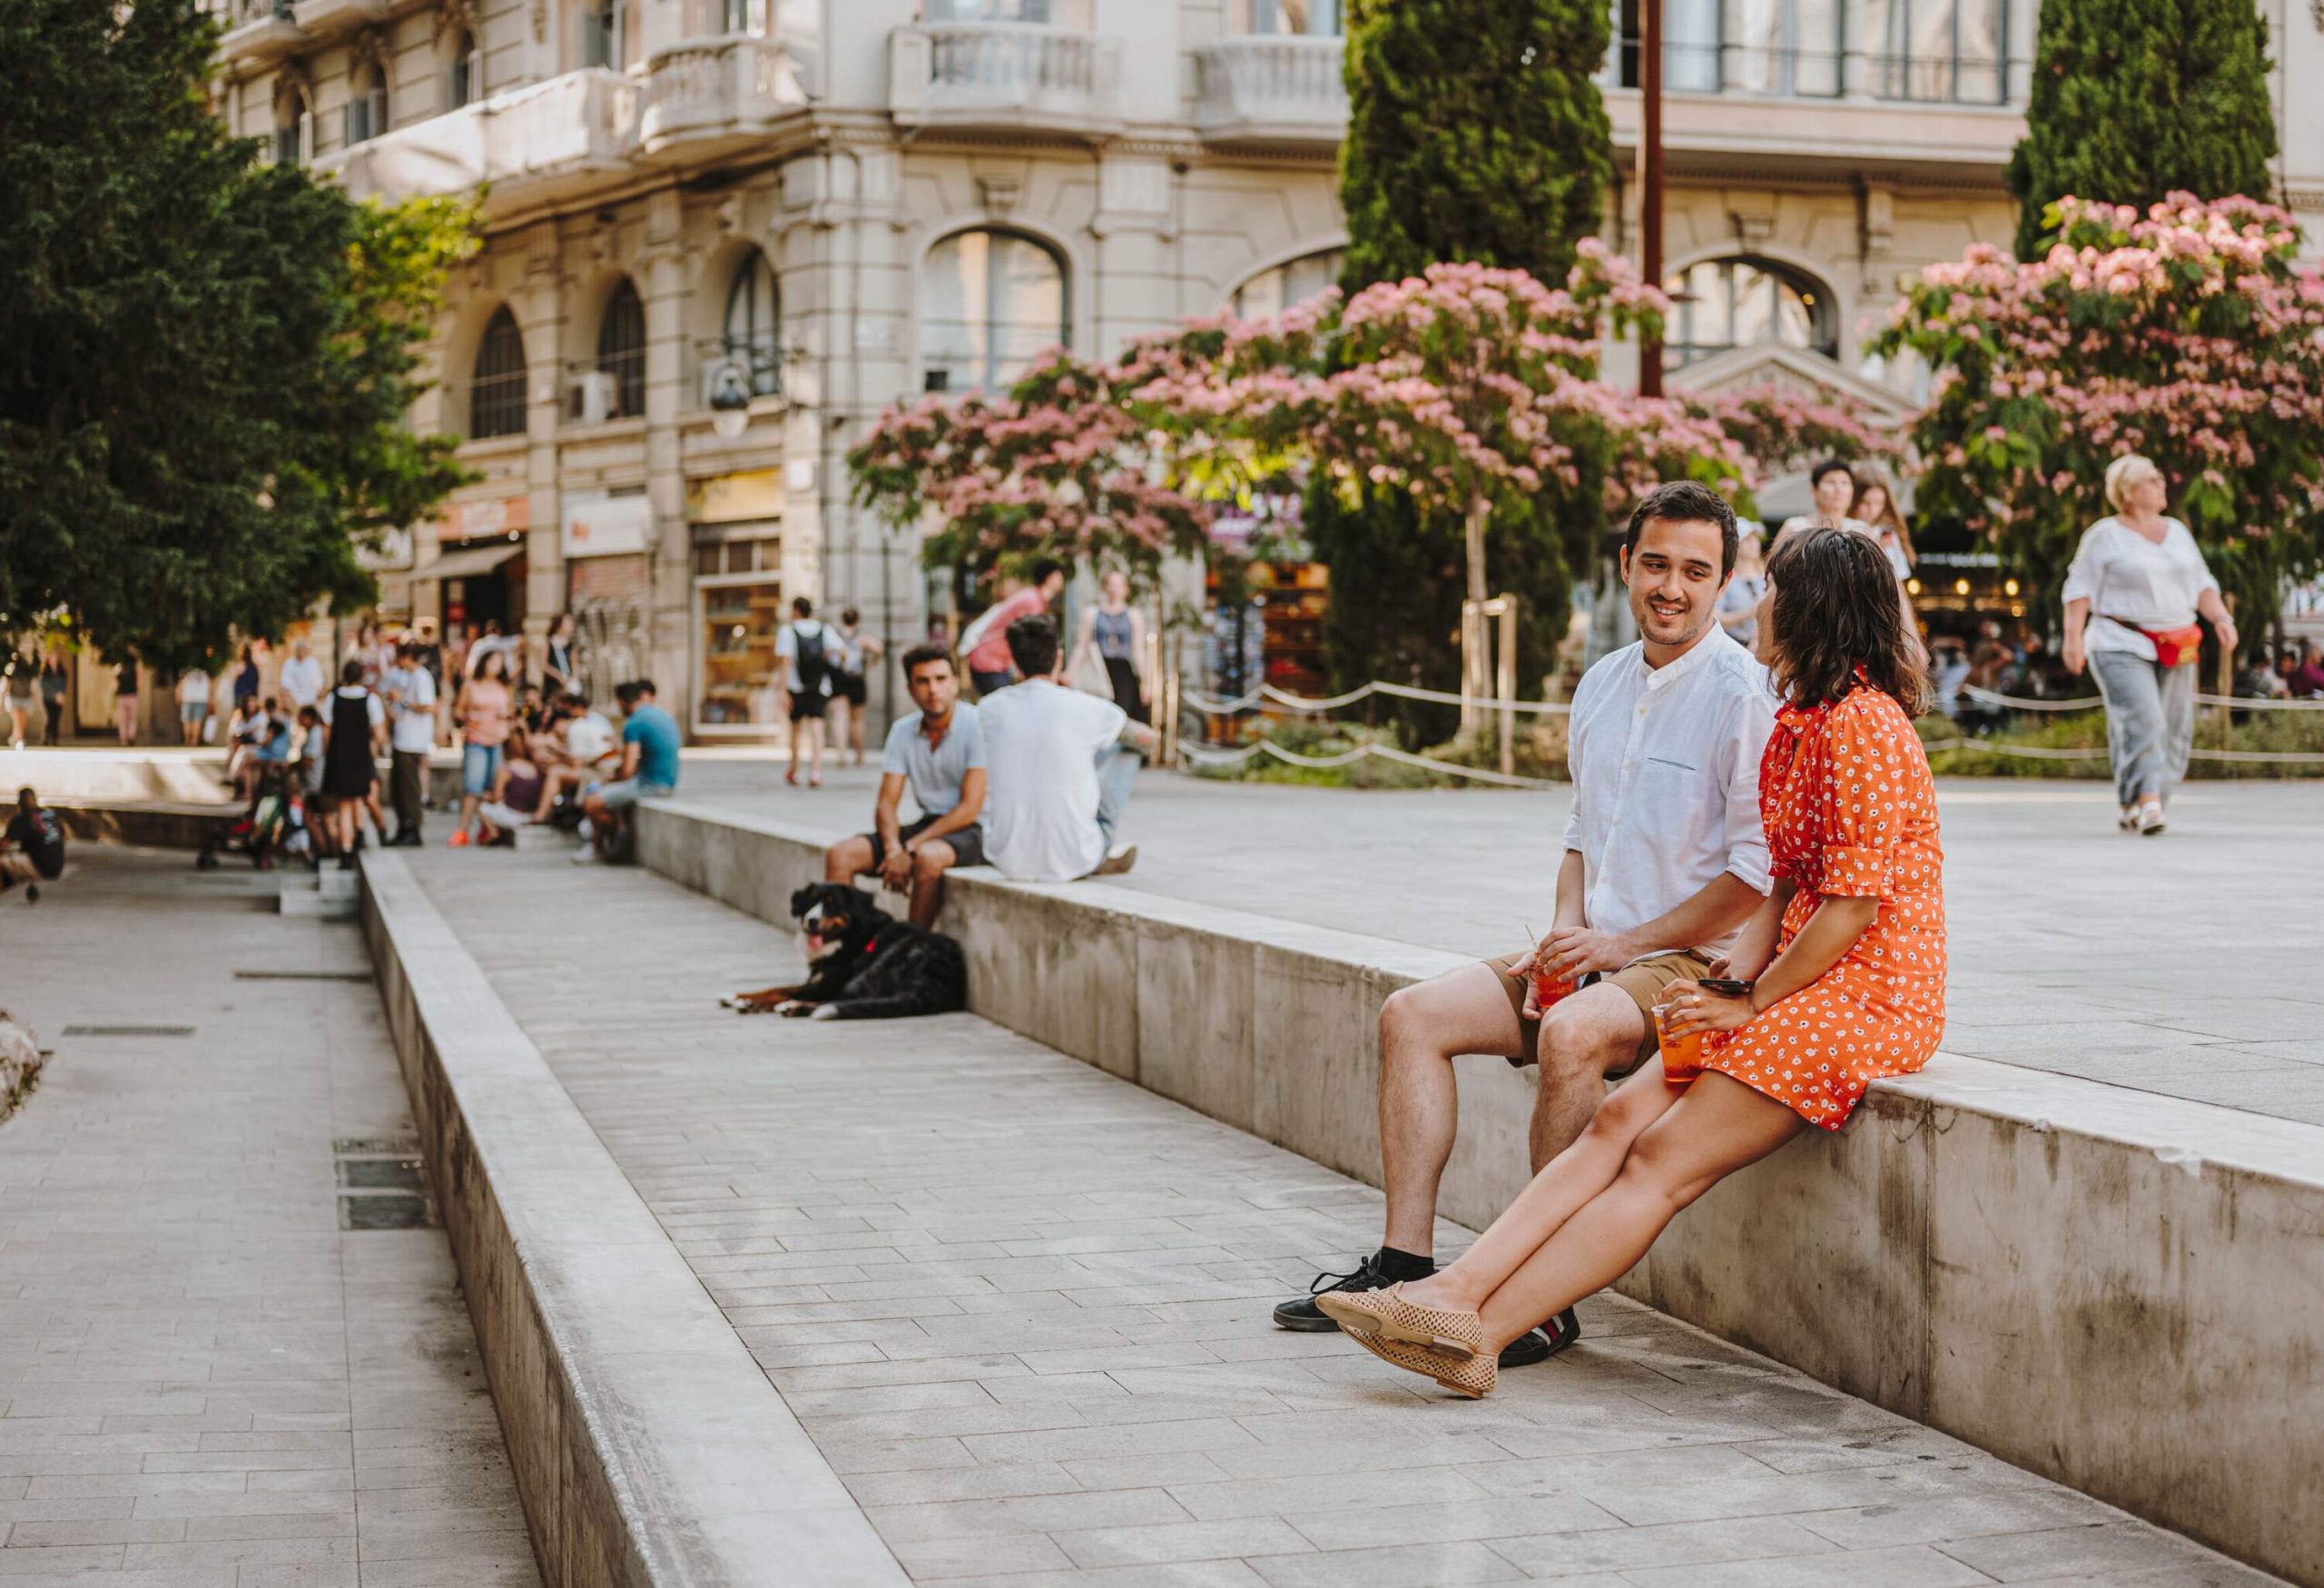 People sit leisurely on a plaza while vibrant blooming trees and charming buildings provide a picturesque backdrop.